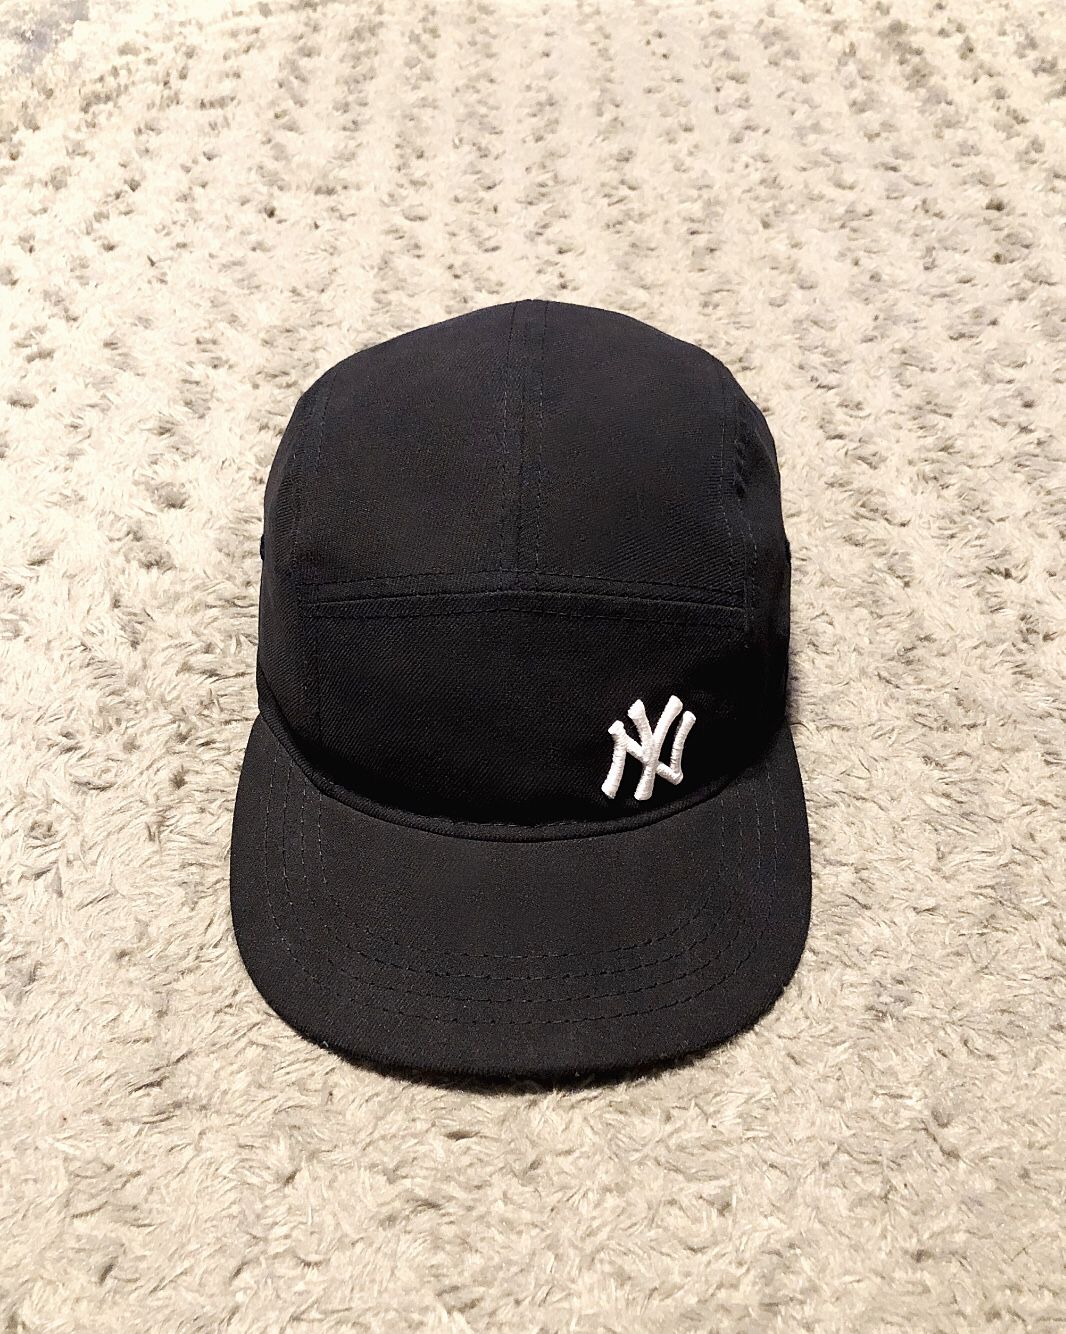 New Era NY Yankees MLB cap paid $38 Brand new! Light Weight Camper 5 Panel Cap in black. Official merchandise cap features the team logo embroidered